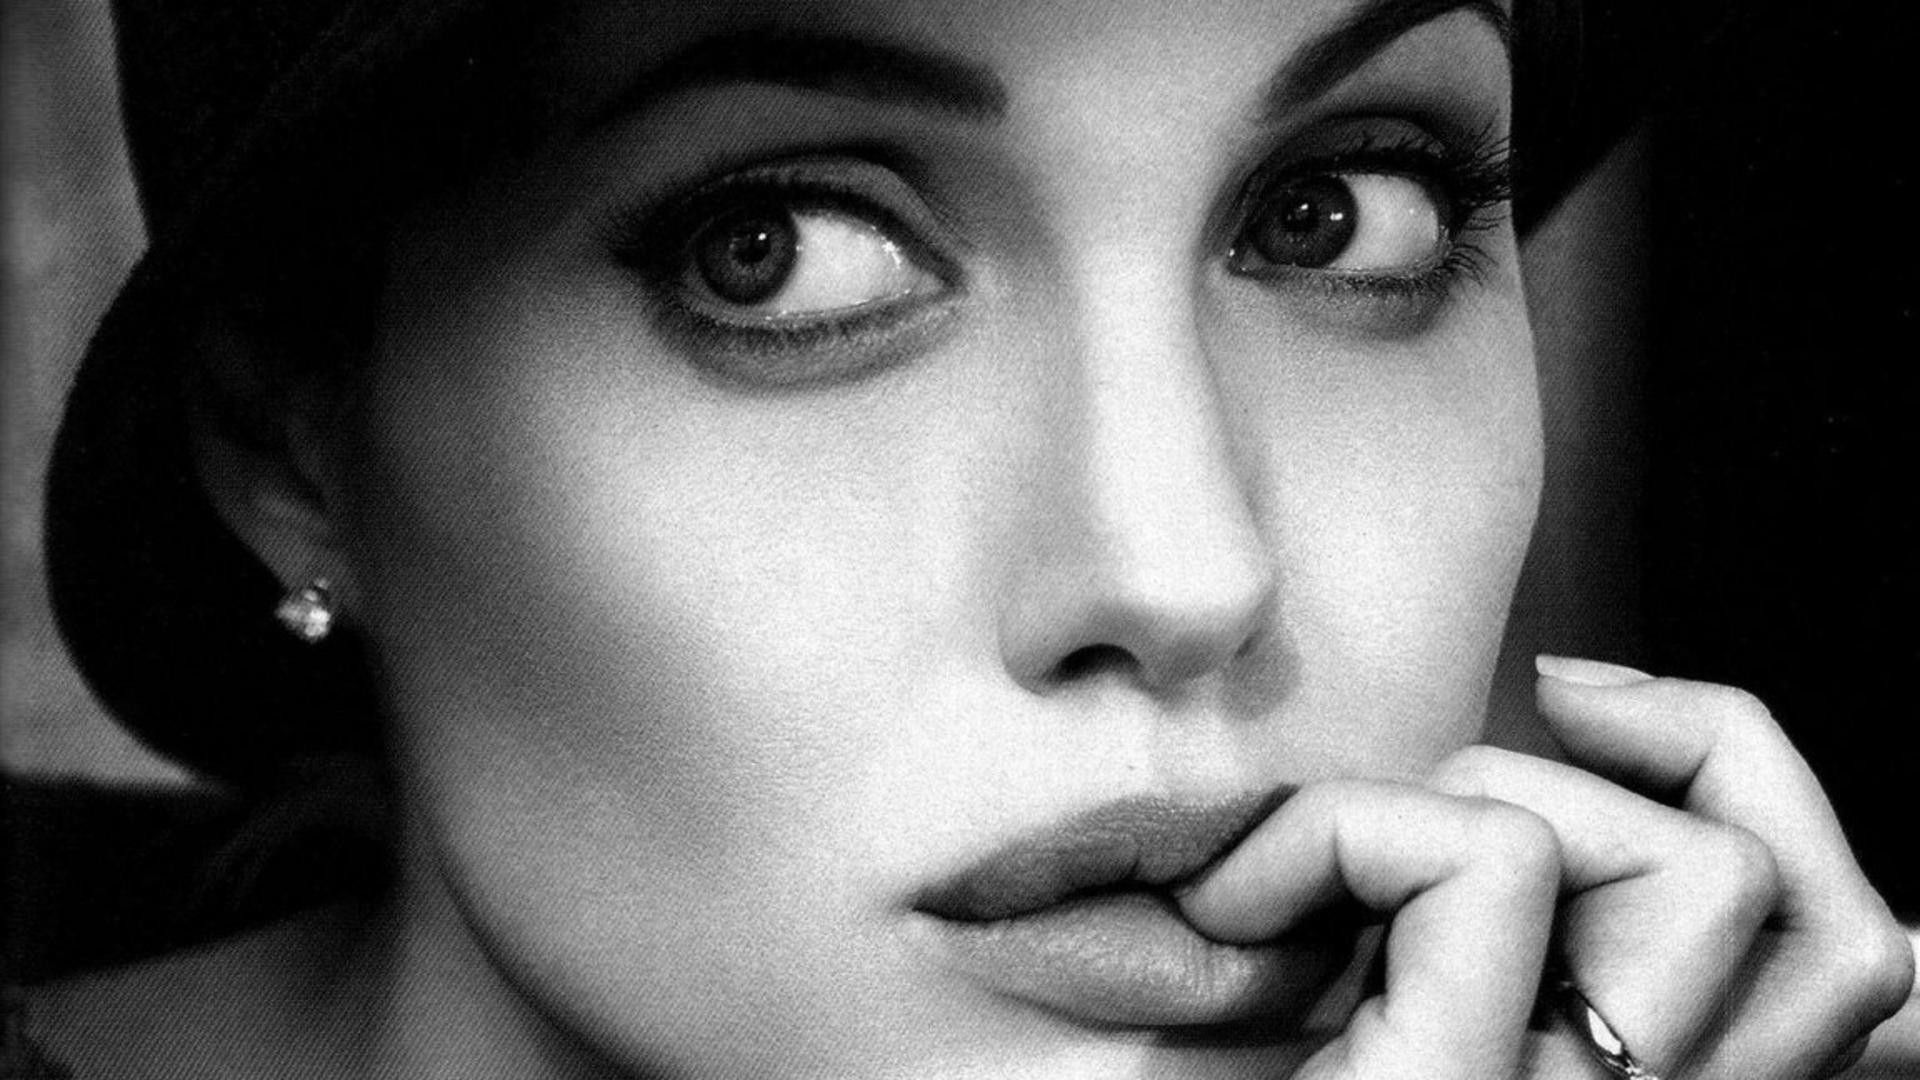 Download Wallpaper, Download 1920x1080 women black and white actress angelina jolie lips monochrome faces 1. Angelina jolie lips, Angelina jolie, Black and white